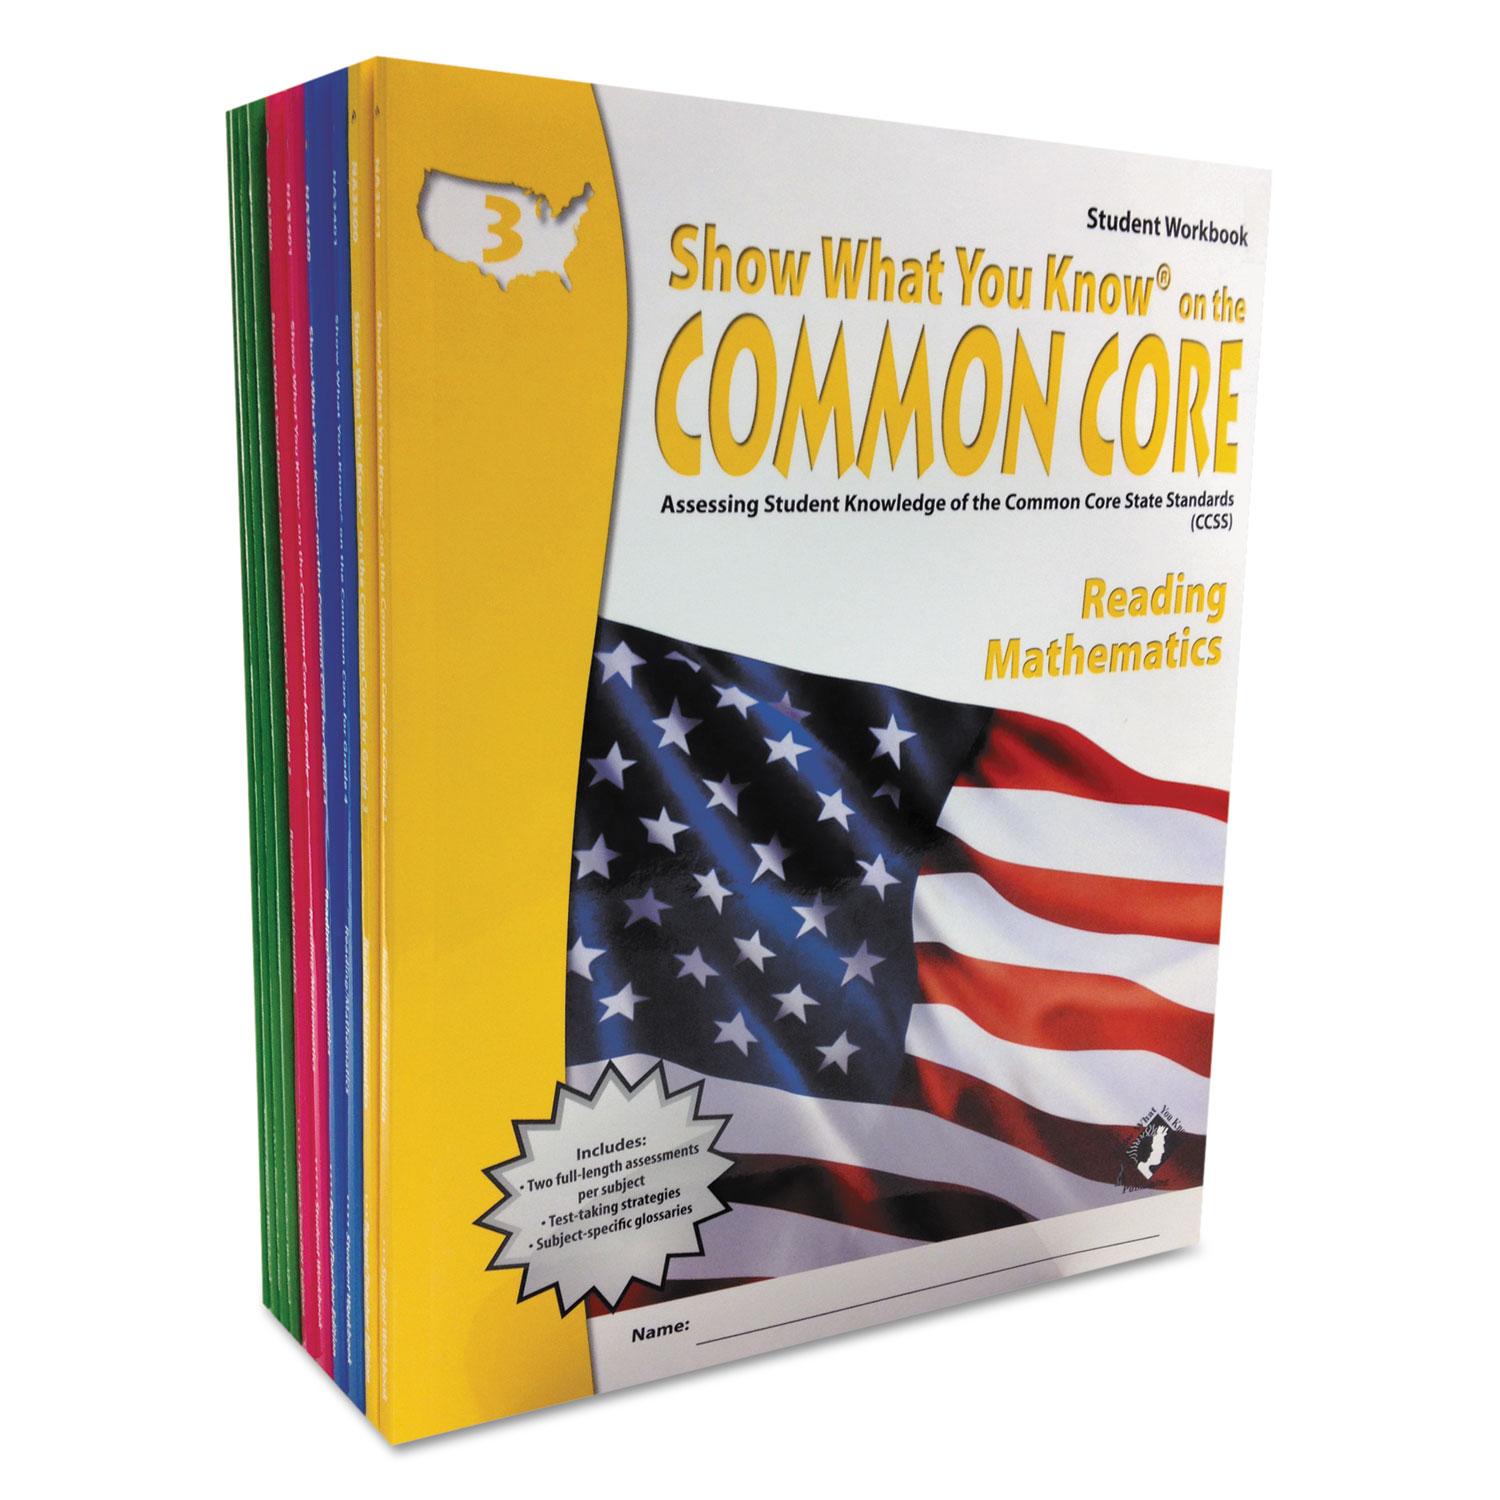 Common Core Assessment Reference Kit, Math/Reading, Grades 3-6, 1280 Pages